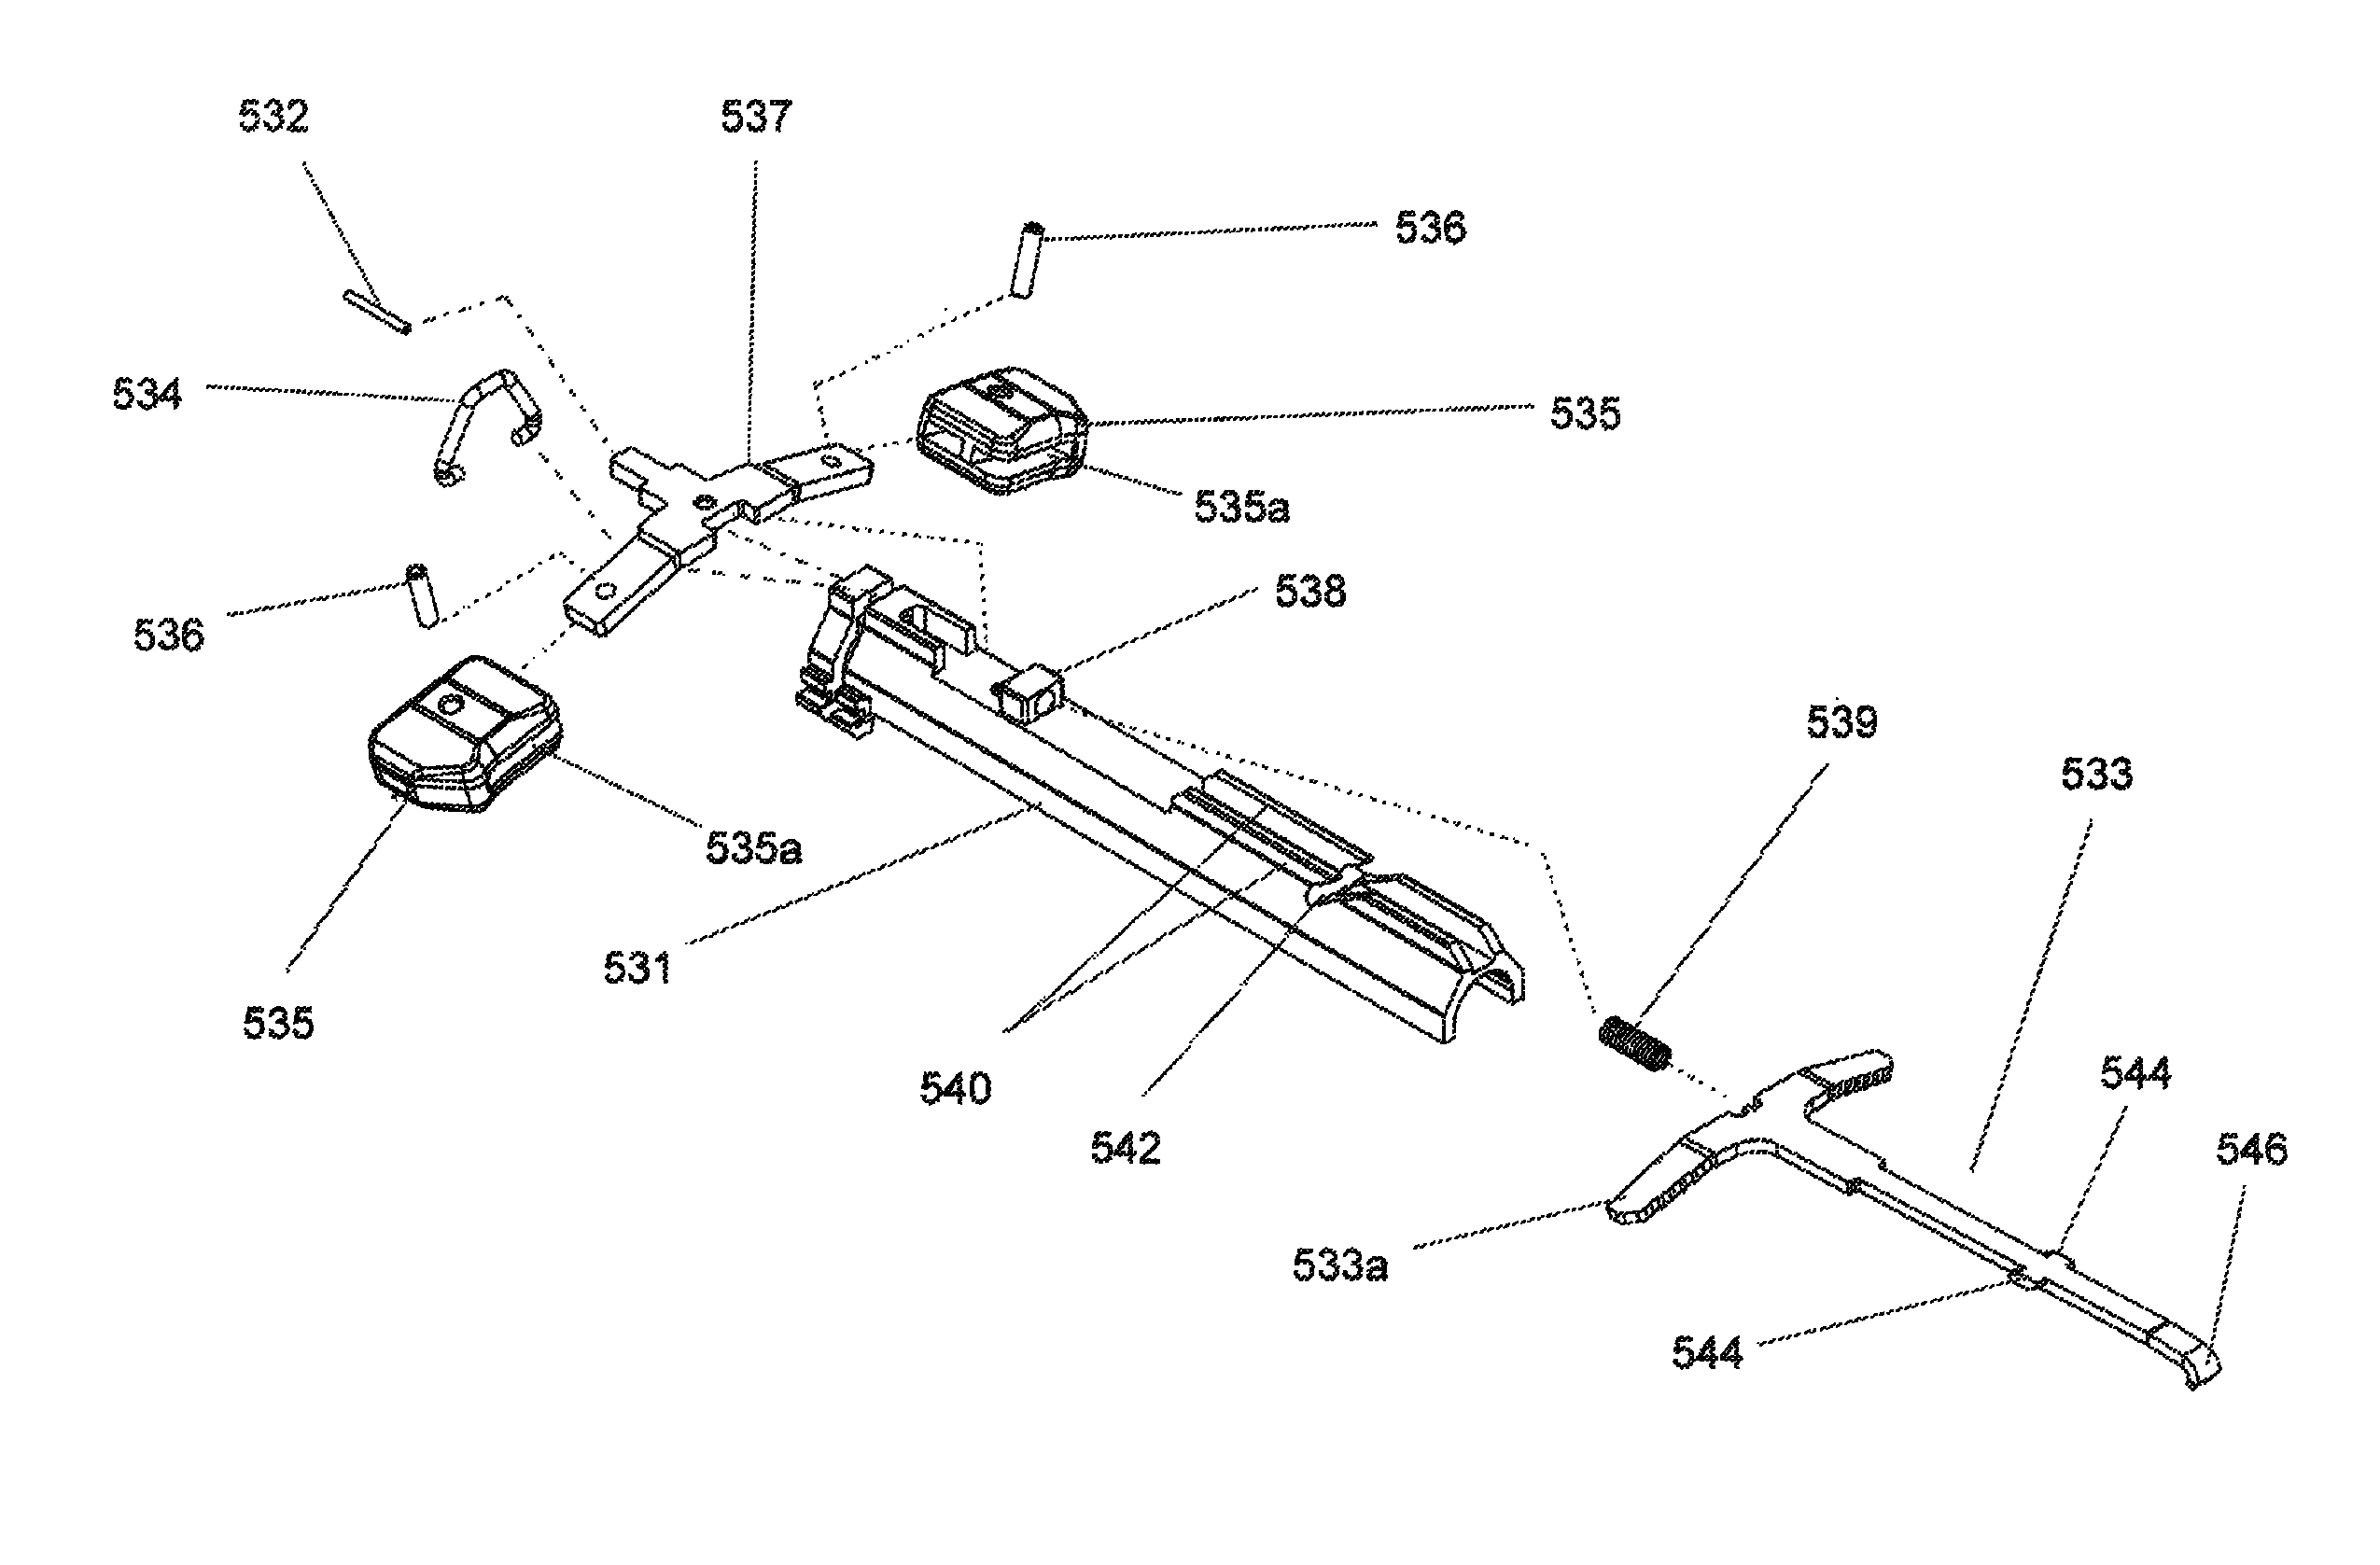 Charging handle with forward assist function